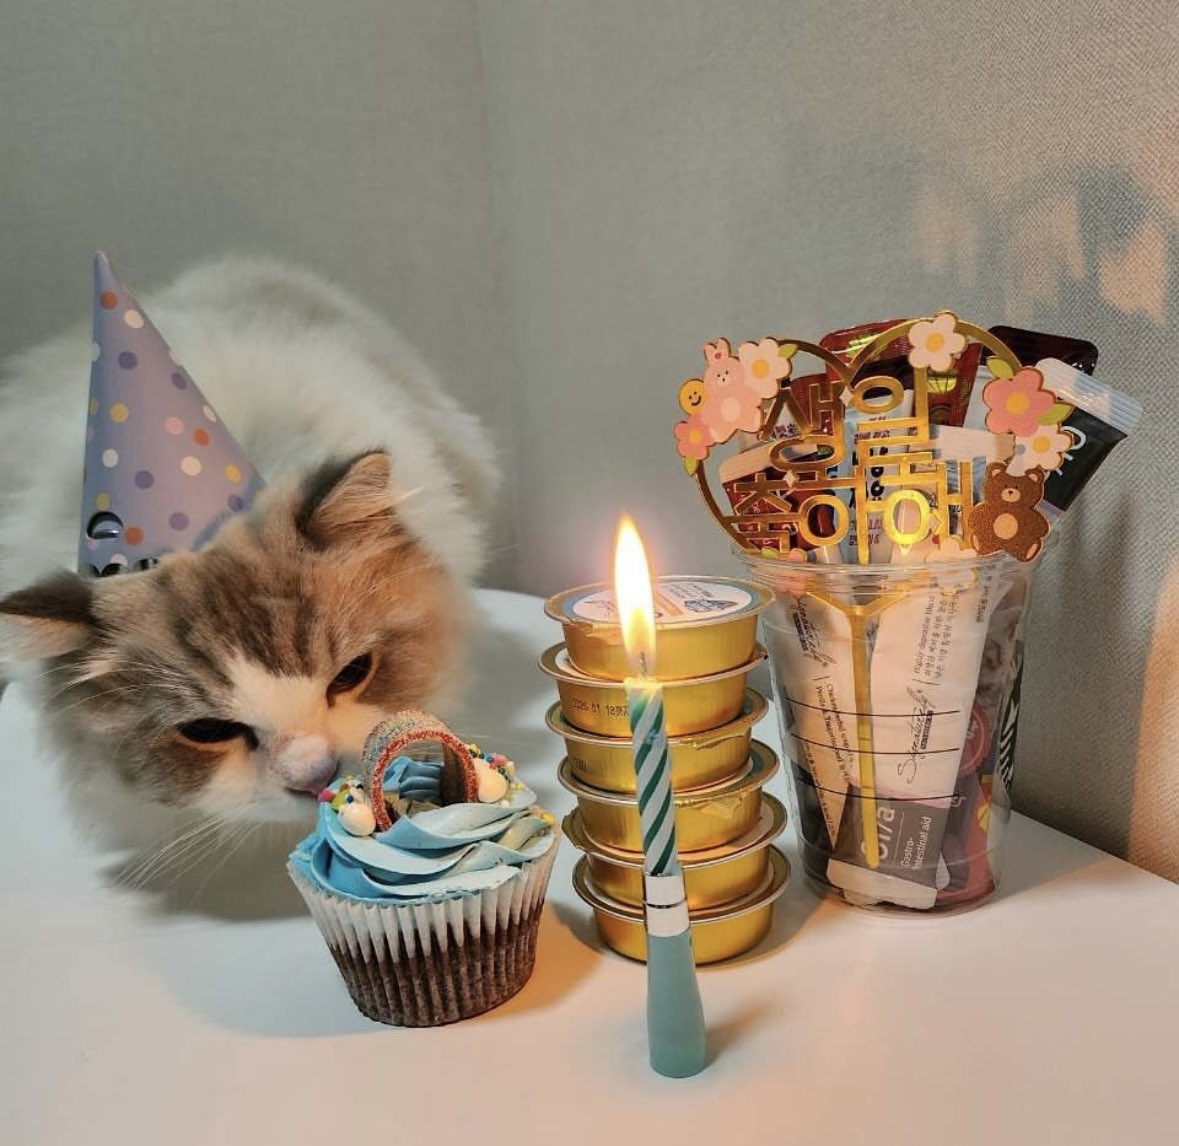 i wish i can be jaemin’s cats… no school, no work, just meow meow and got my birthday celebrated